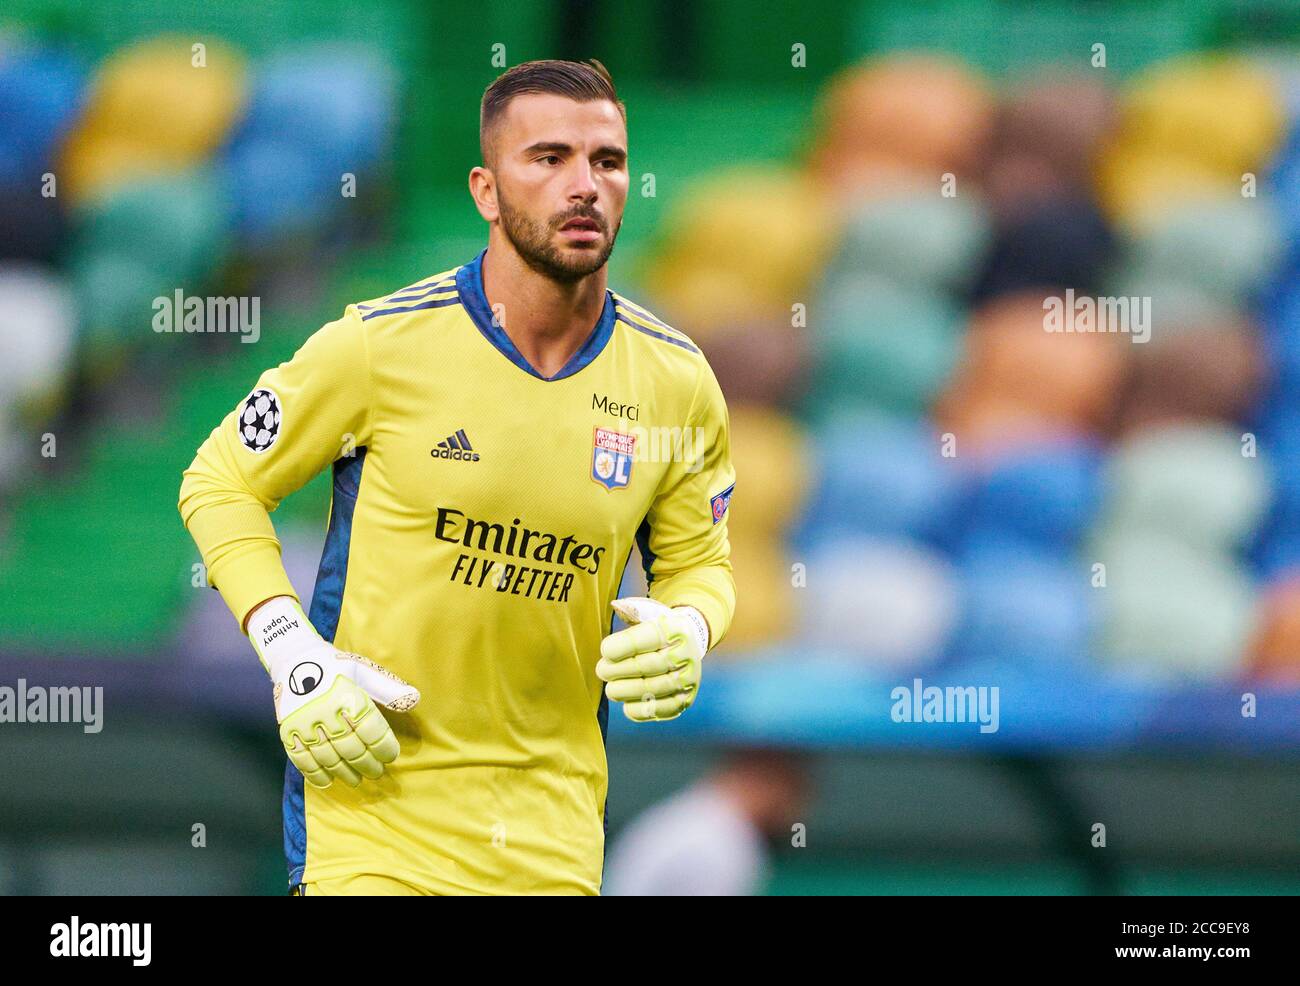 Lisbon, Lissabon, Portugal, 19th August 2020. Anthony LOPES, LYON 1 in the  semifinal match UEFA Champions League, final tournament FC BAYERN MUENCHEN  - OLYMPIQUE LYON 3-0 in season 2019/2020, FCB, © Peter